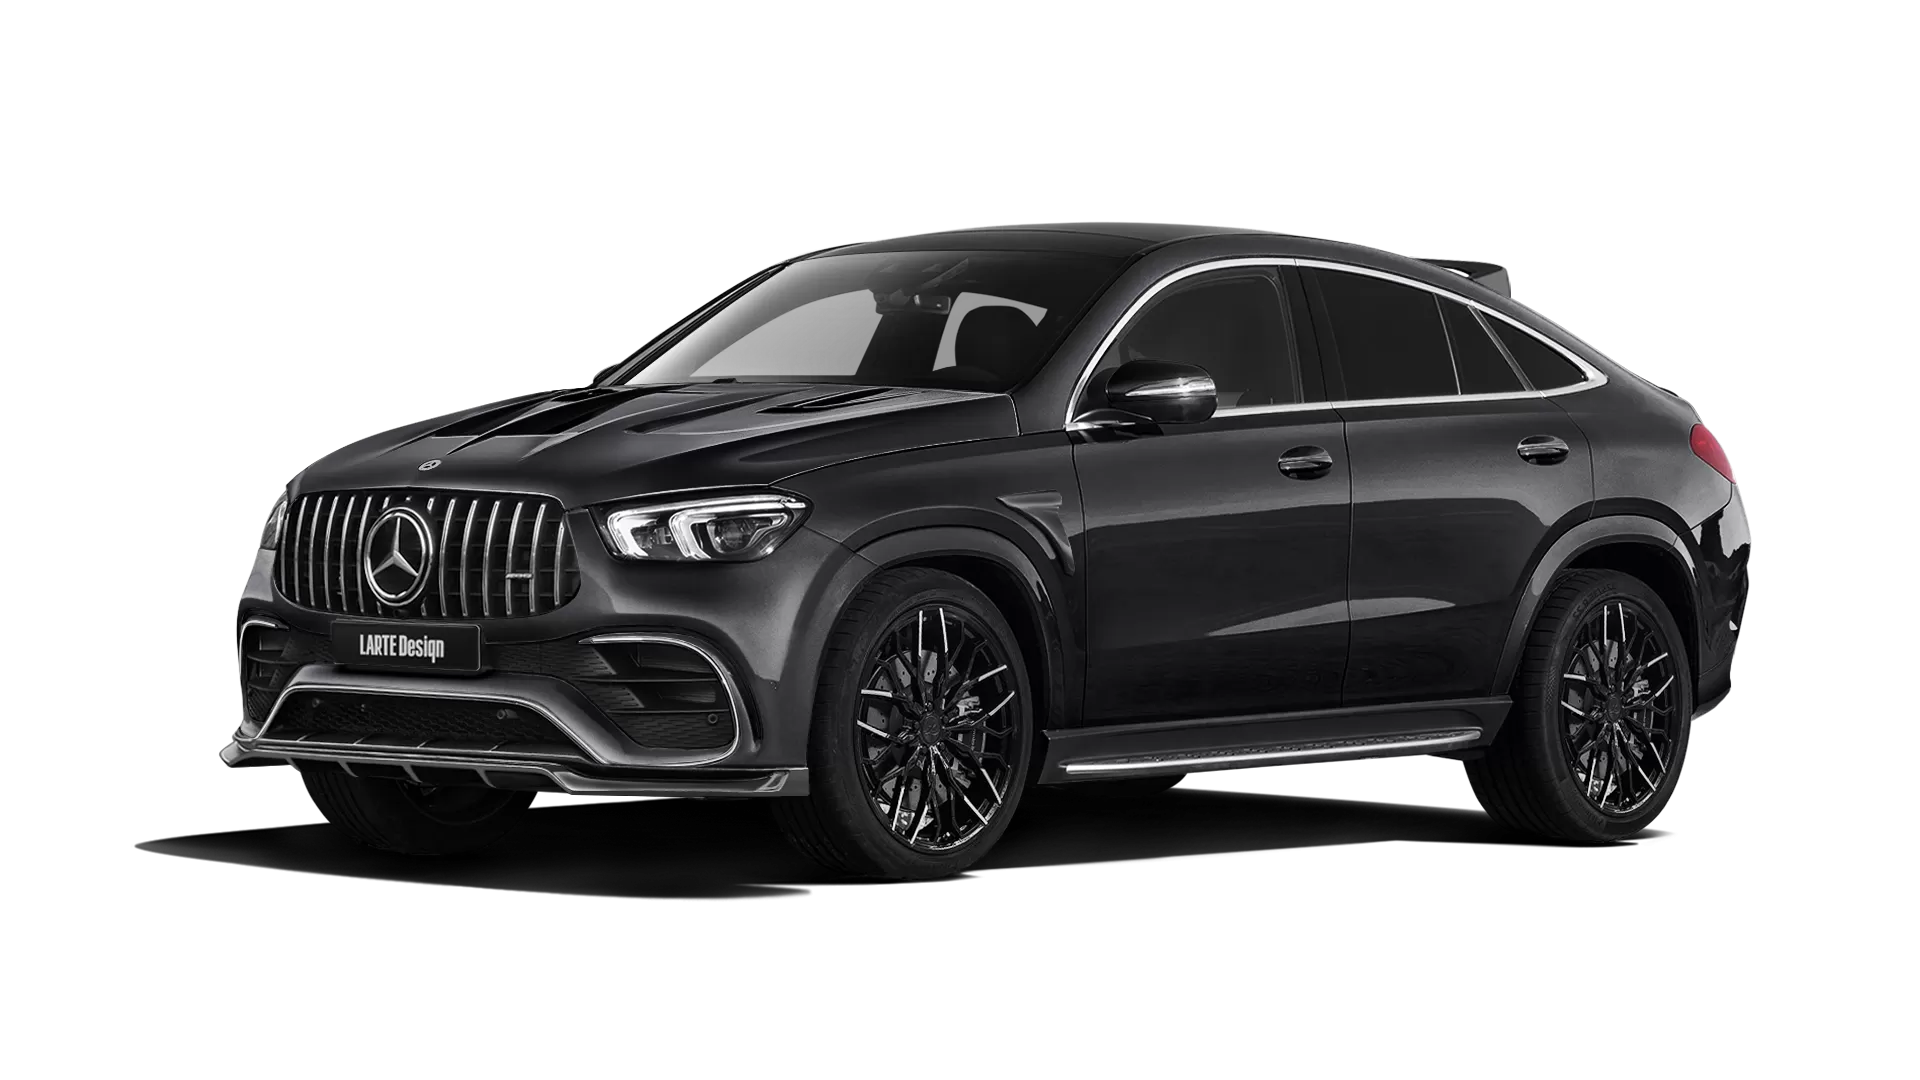 Mercedes GLE Coupe AMG 63 C167 with painted body kit: front view shown in Obsidian Black